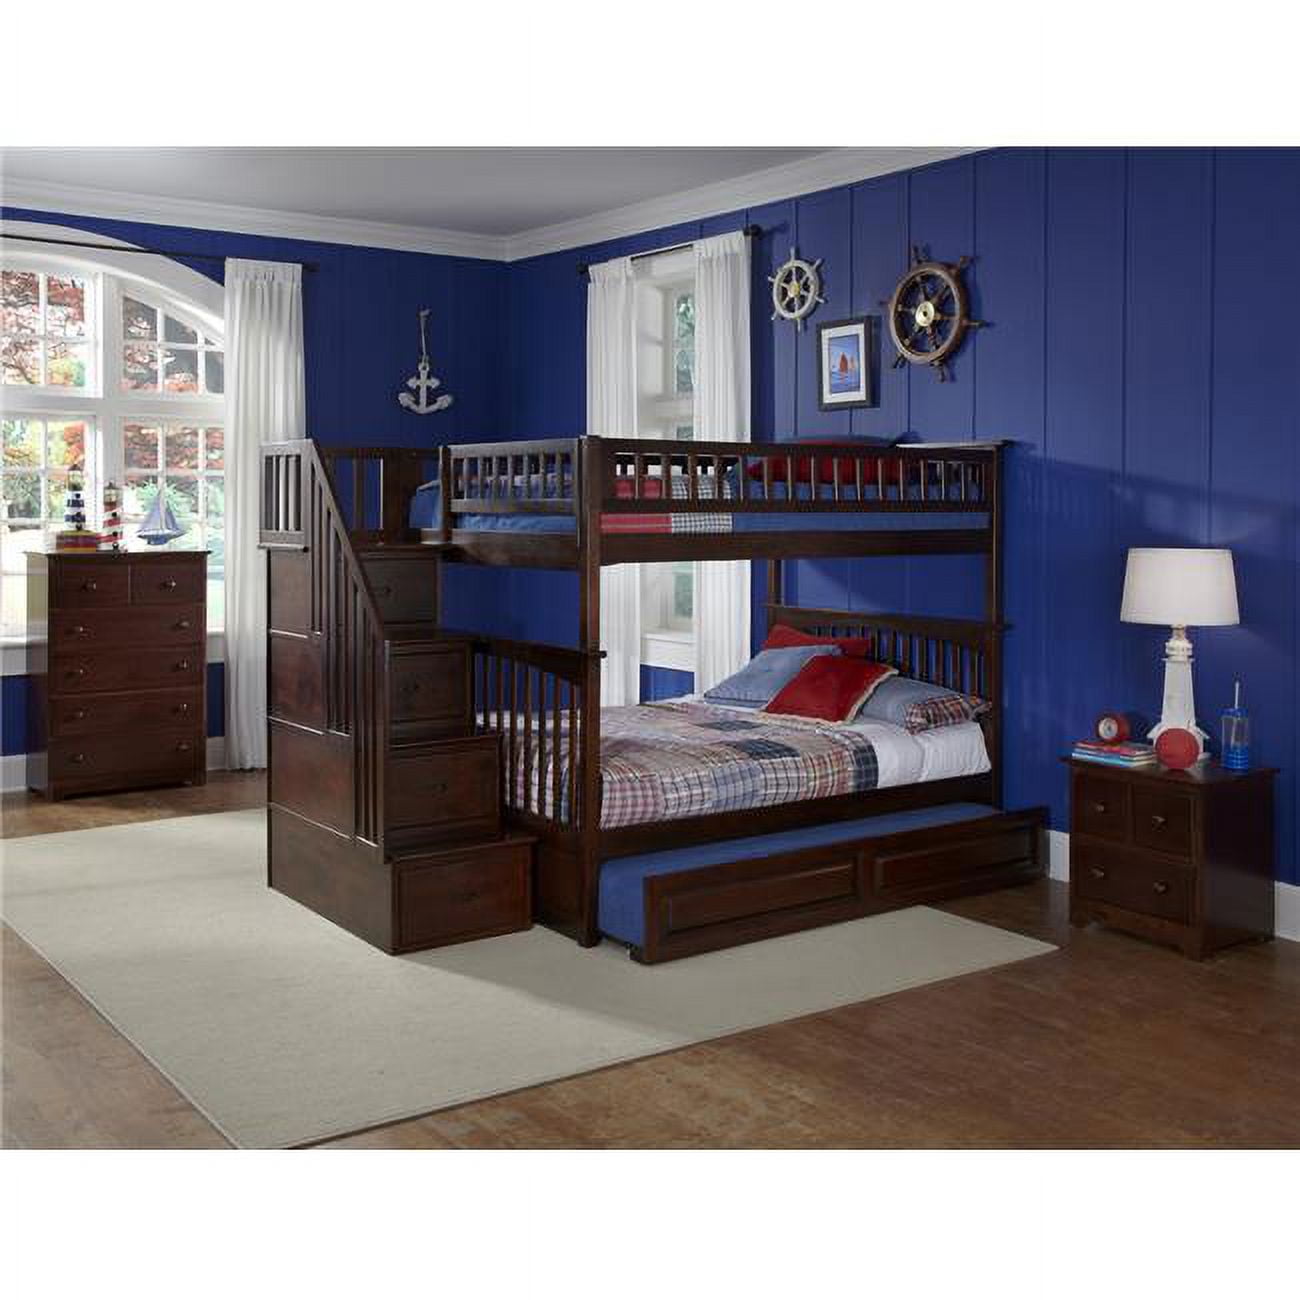 Ab55854 Columbia Staircase Bunkbed With Urban Trundle Bed - Antique Walnut, Full Over Full Size